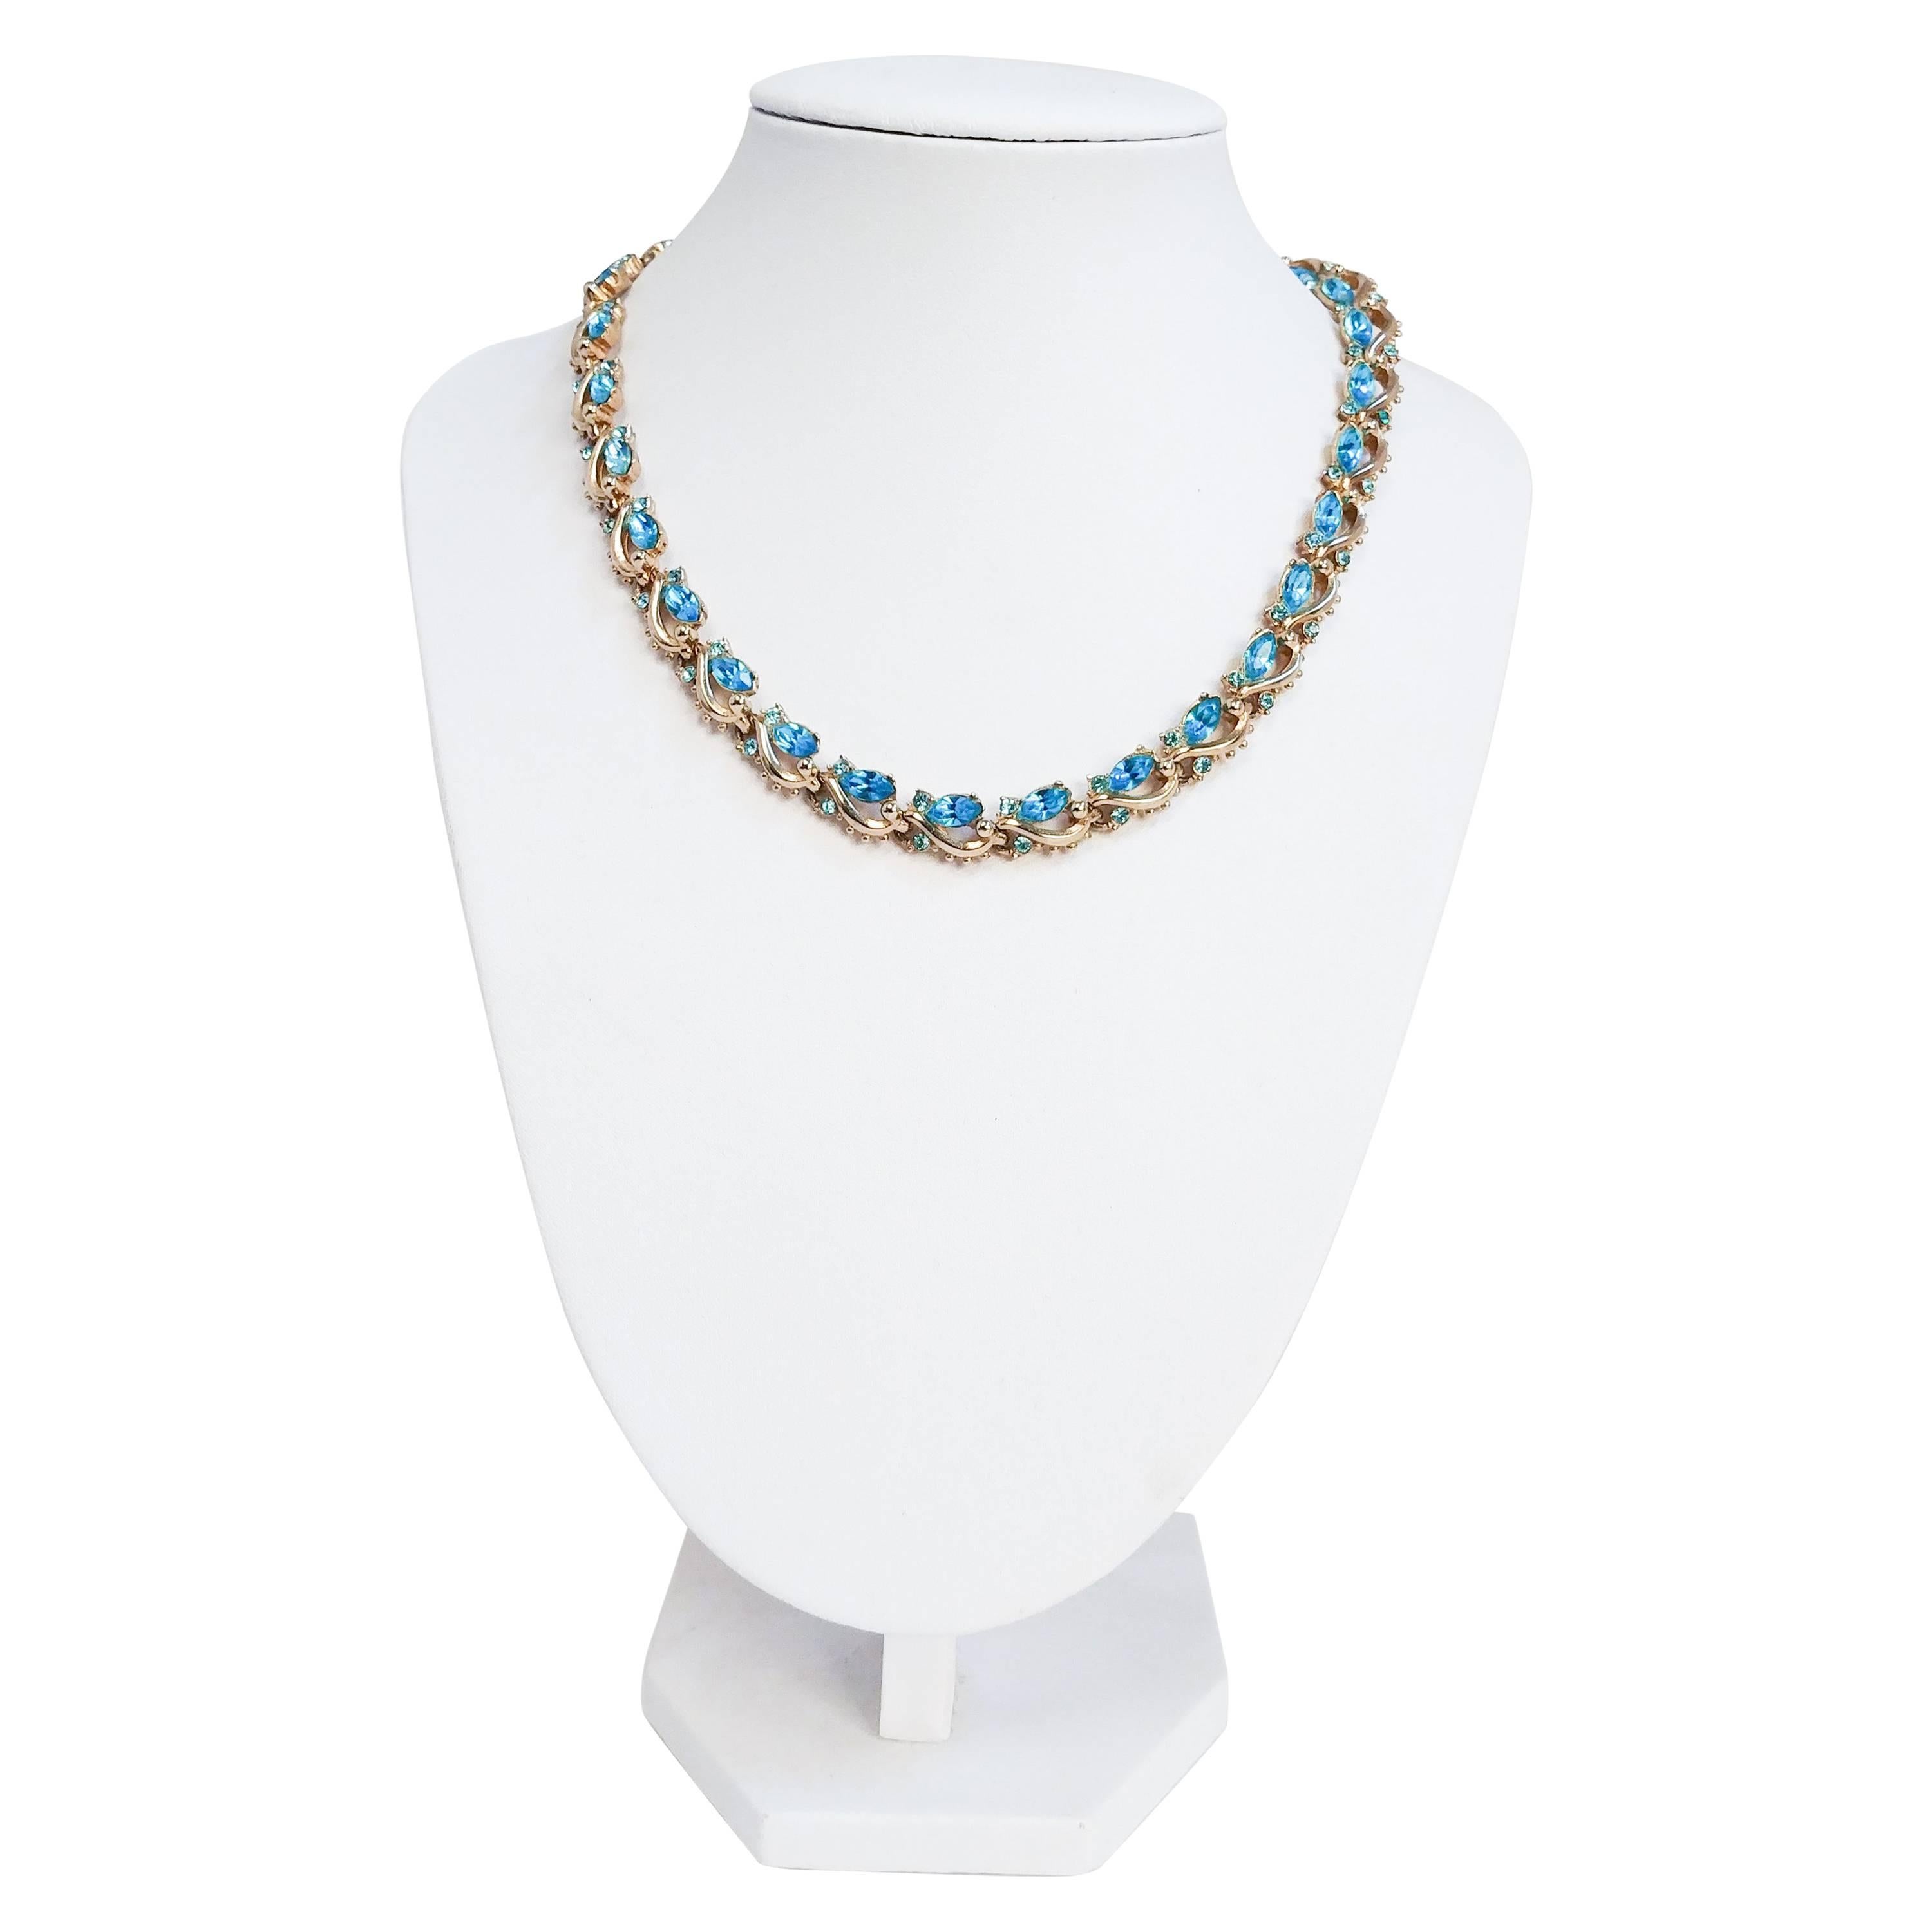 1960s Holly Craft Blue Stone & Gold-toned Necklace